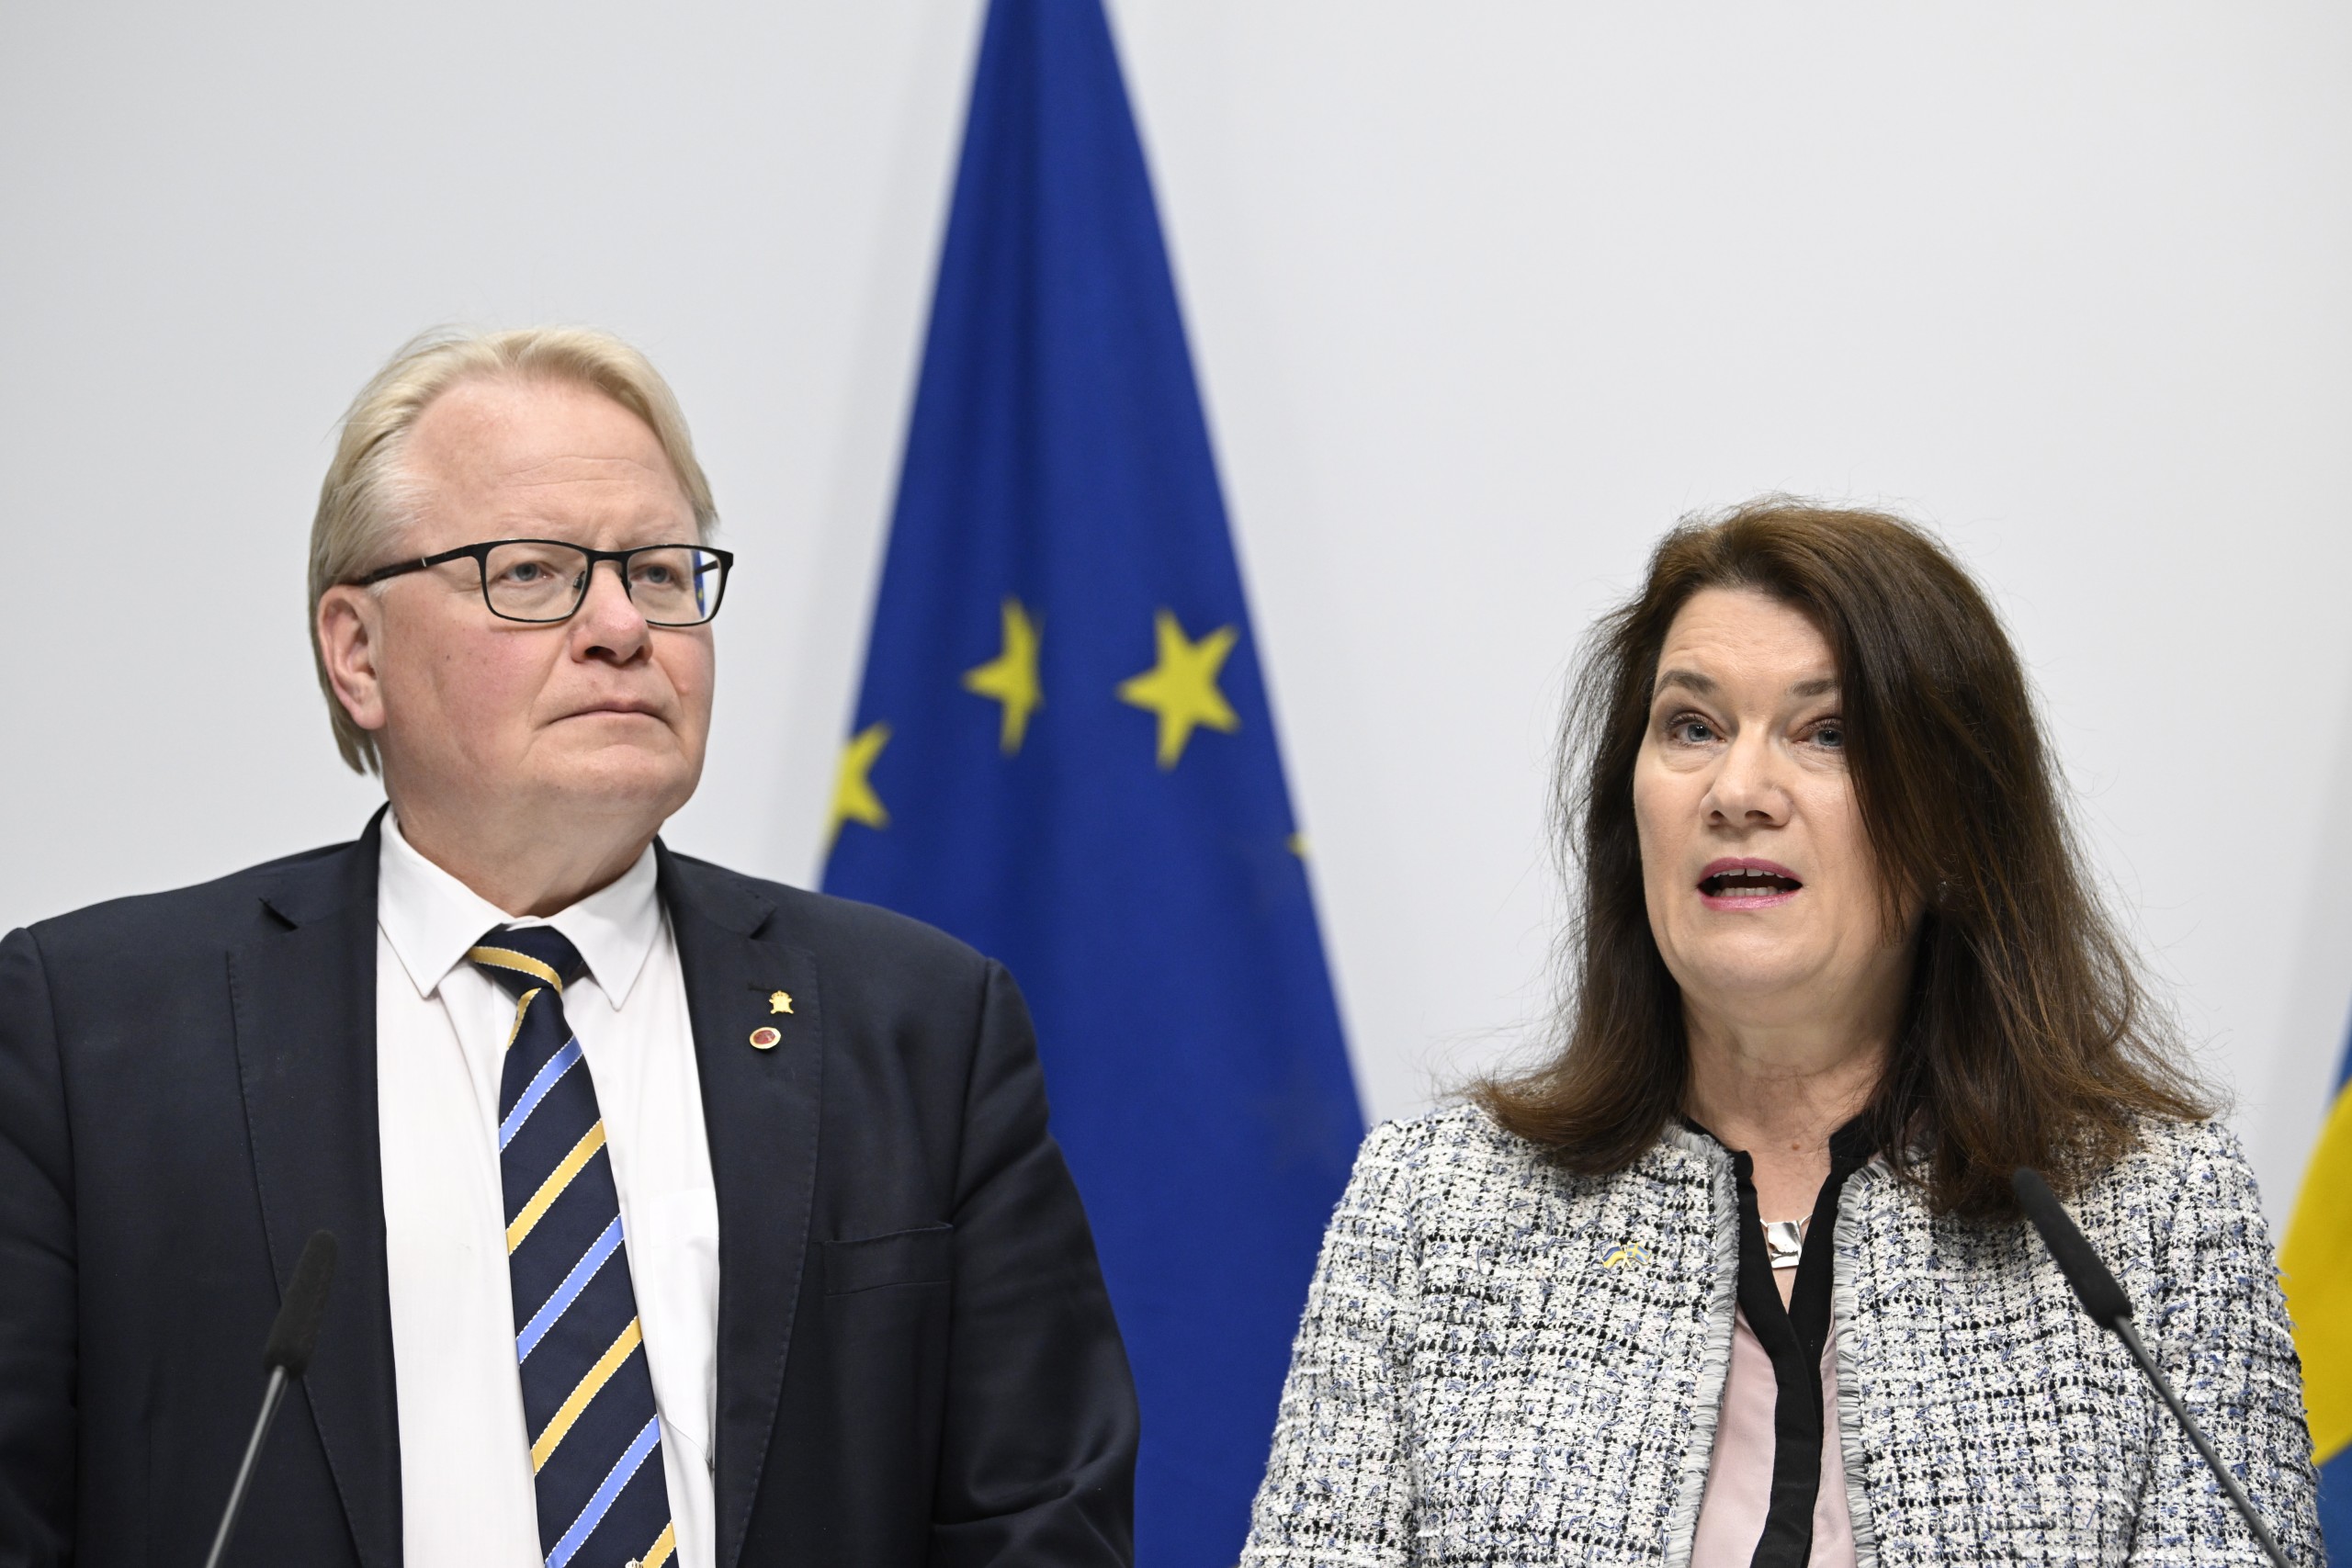 epa09944059 Minister of Defence of Sweden Peter Hultqvist (L) and Swedish Minister of Foreign Affairs Ann Linde present a security policy analysis during a press conference in Stockholm, Sweden, 13 May 2022. The Government's security policy analysis assesses that NATO membership increases security for Sweden.  EPA/Henrik Montgomery SWEDEN OUT SWEDEN OUT